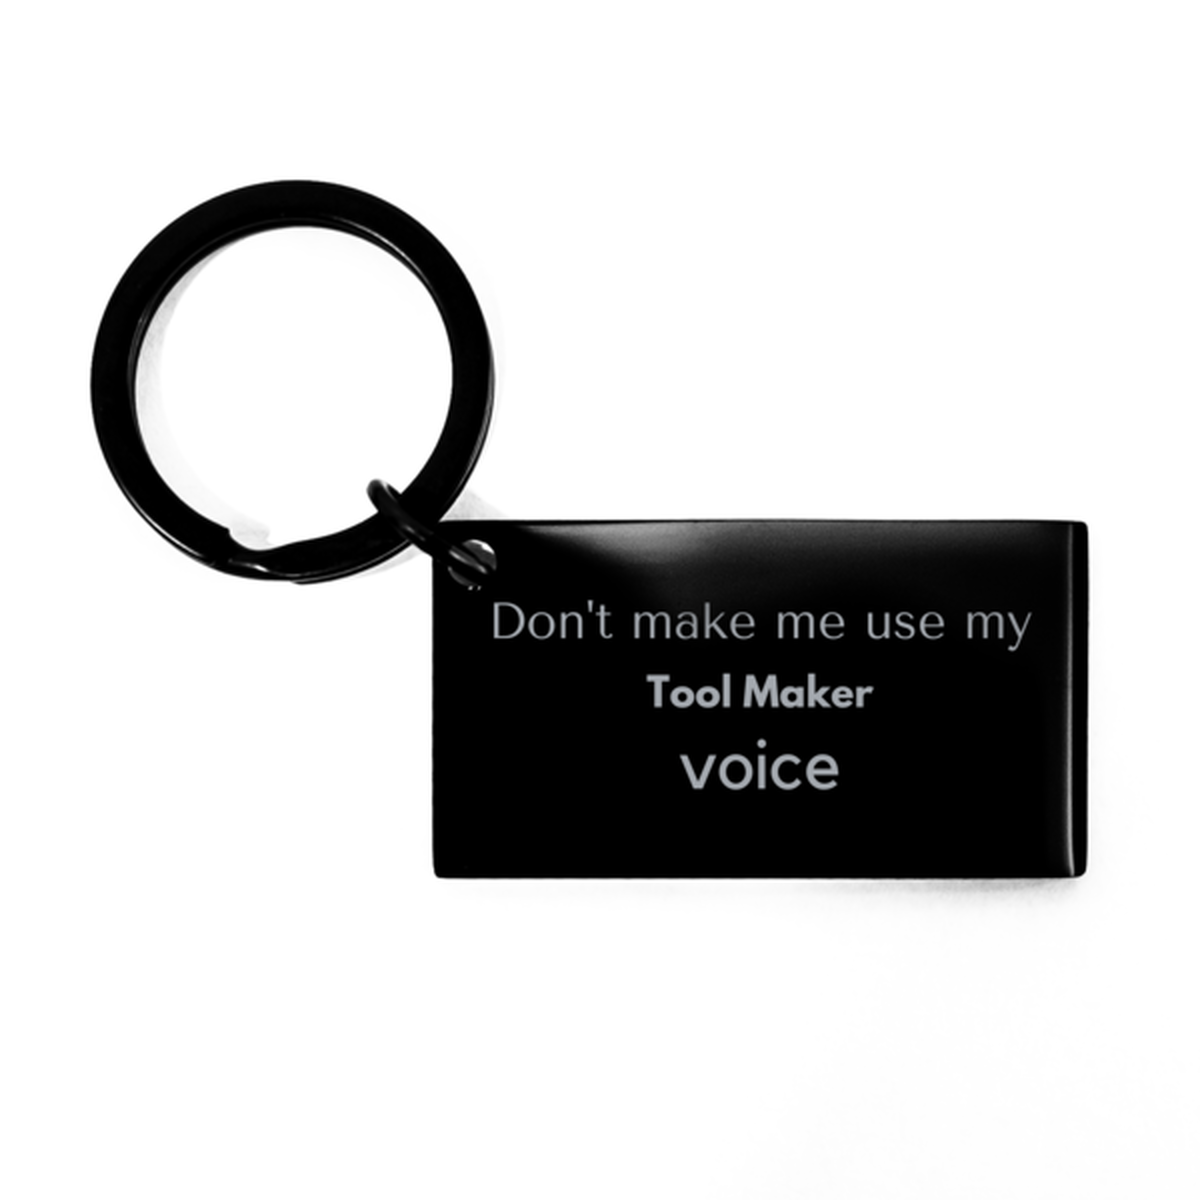 Don't make me use my Tool Maker voice, Sarcasm Tool Maker Gifts, Christmas Tool Maker Keychain Birthday Unique Gifts For Tool Maker Coworkers, Men, Women, Colleague, Friends